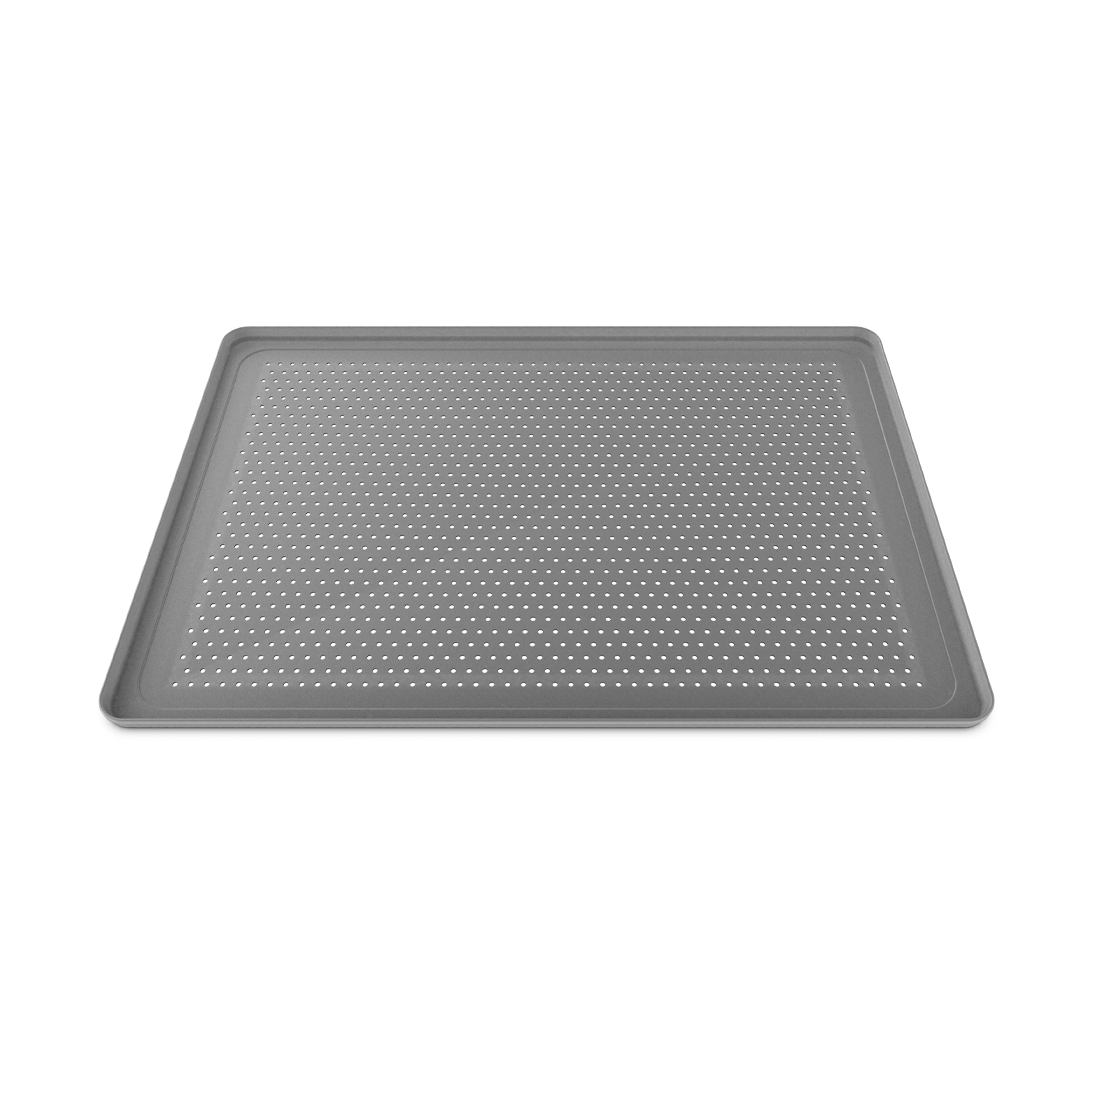 Unox ,TG415, 60X40 Perforated Nonstick Silicone Coated Aluminum Pan|mkayn|مكاين